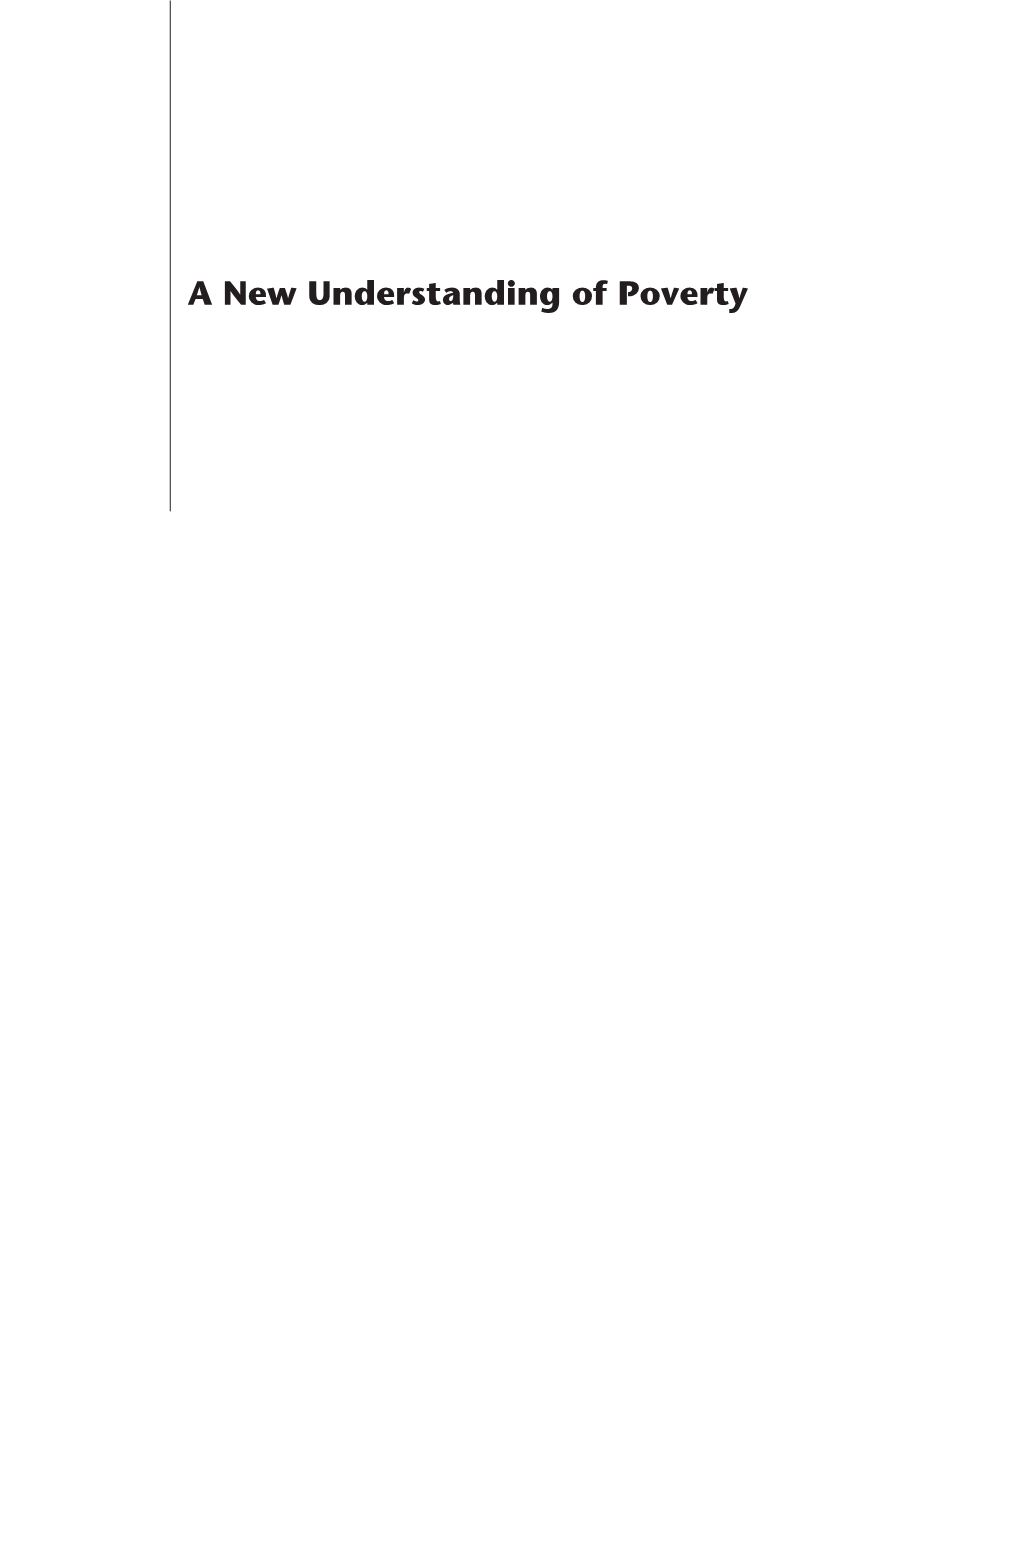 A New Understanding of Poverty A New Understanding of Poverty Poverty Measurement and Policy Implications